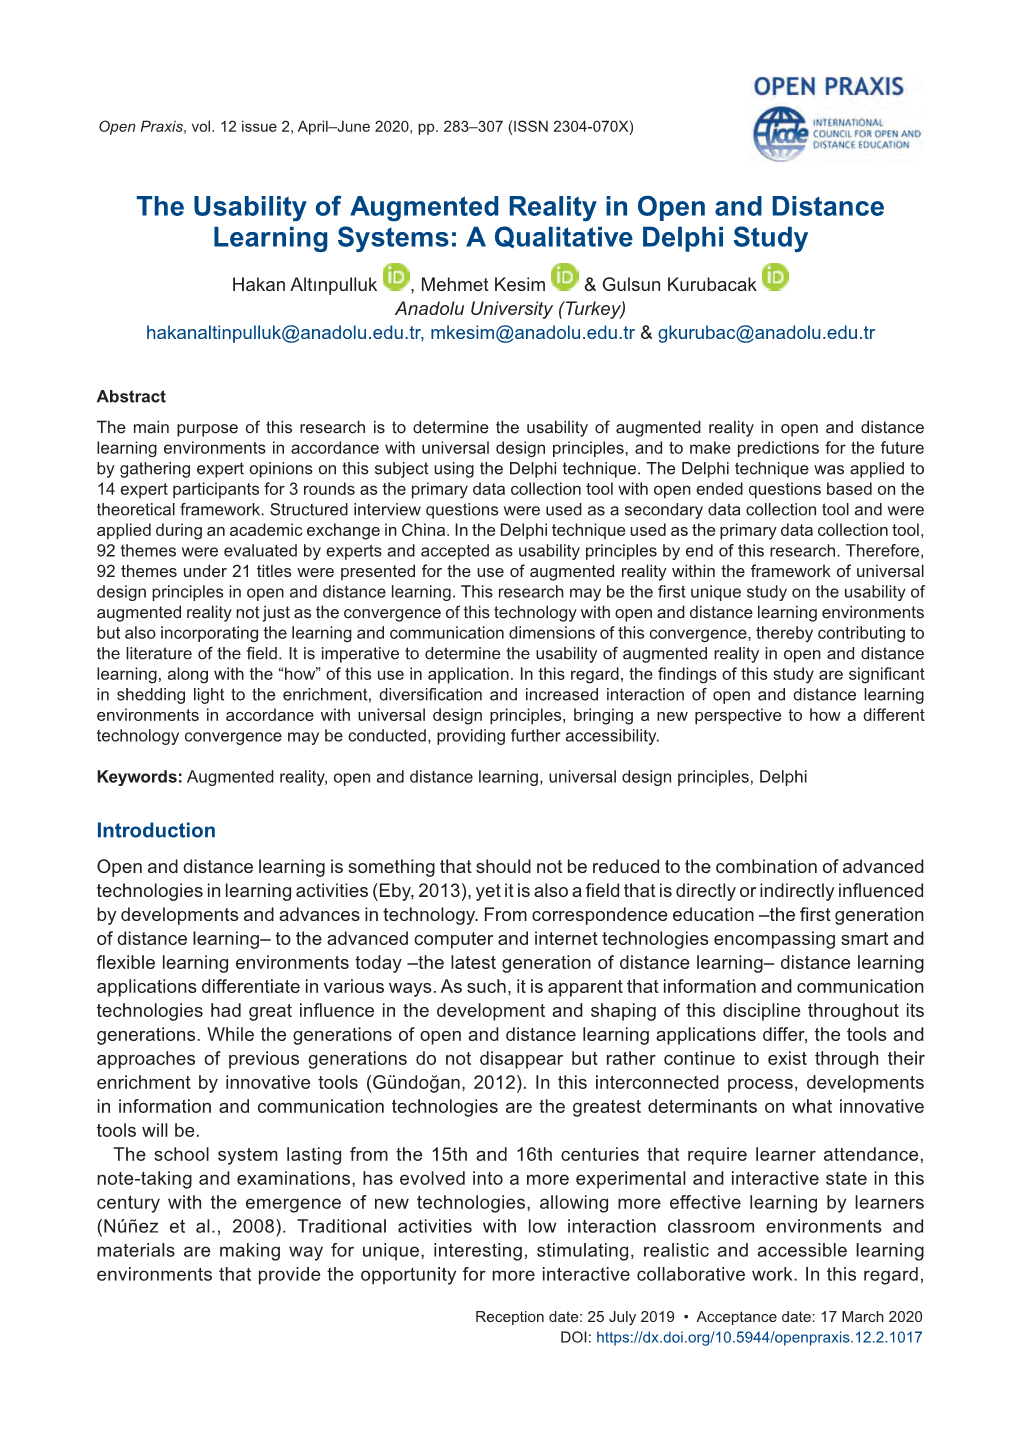 The Usability of Augmented Reality in Open and Distance Learning Systems: a Qualitative Delphi Study